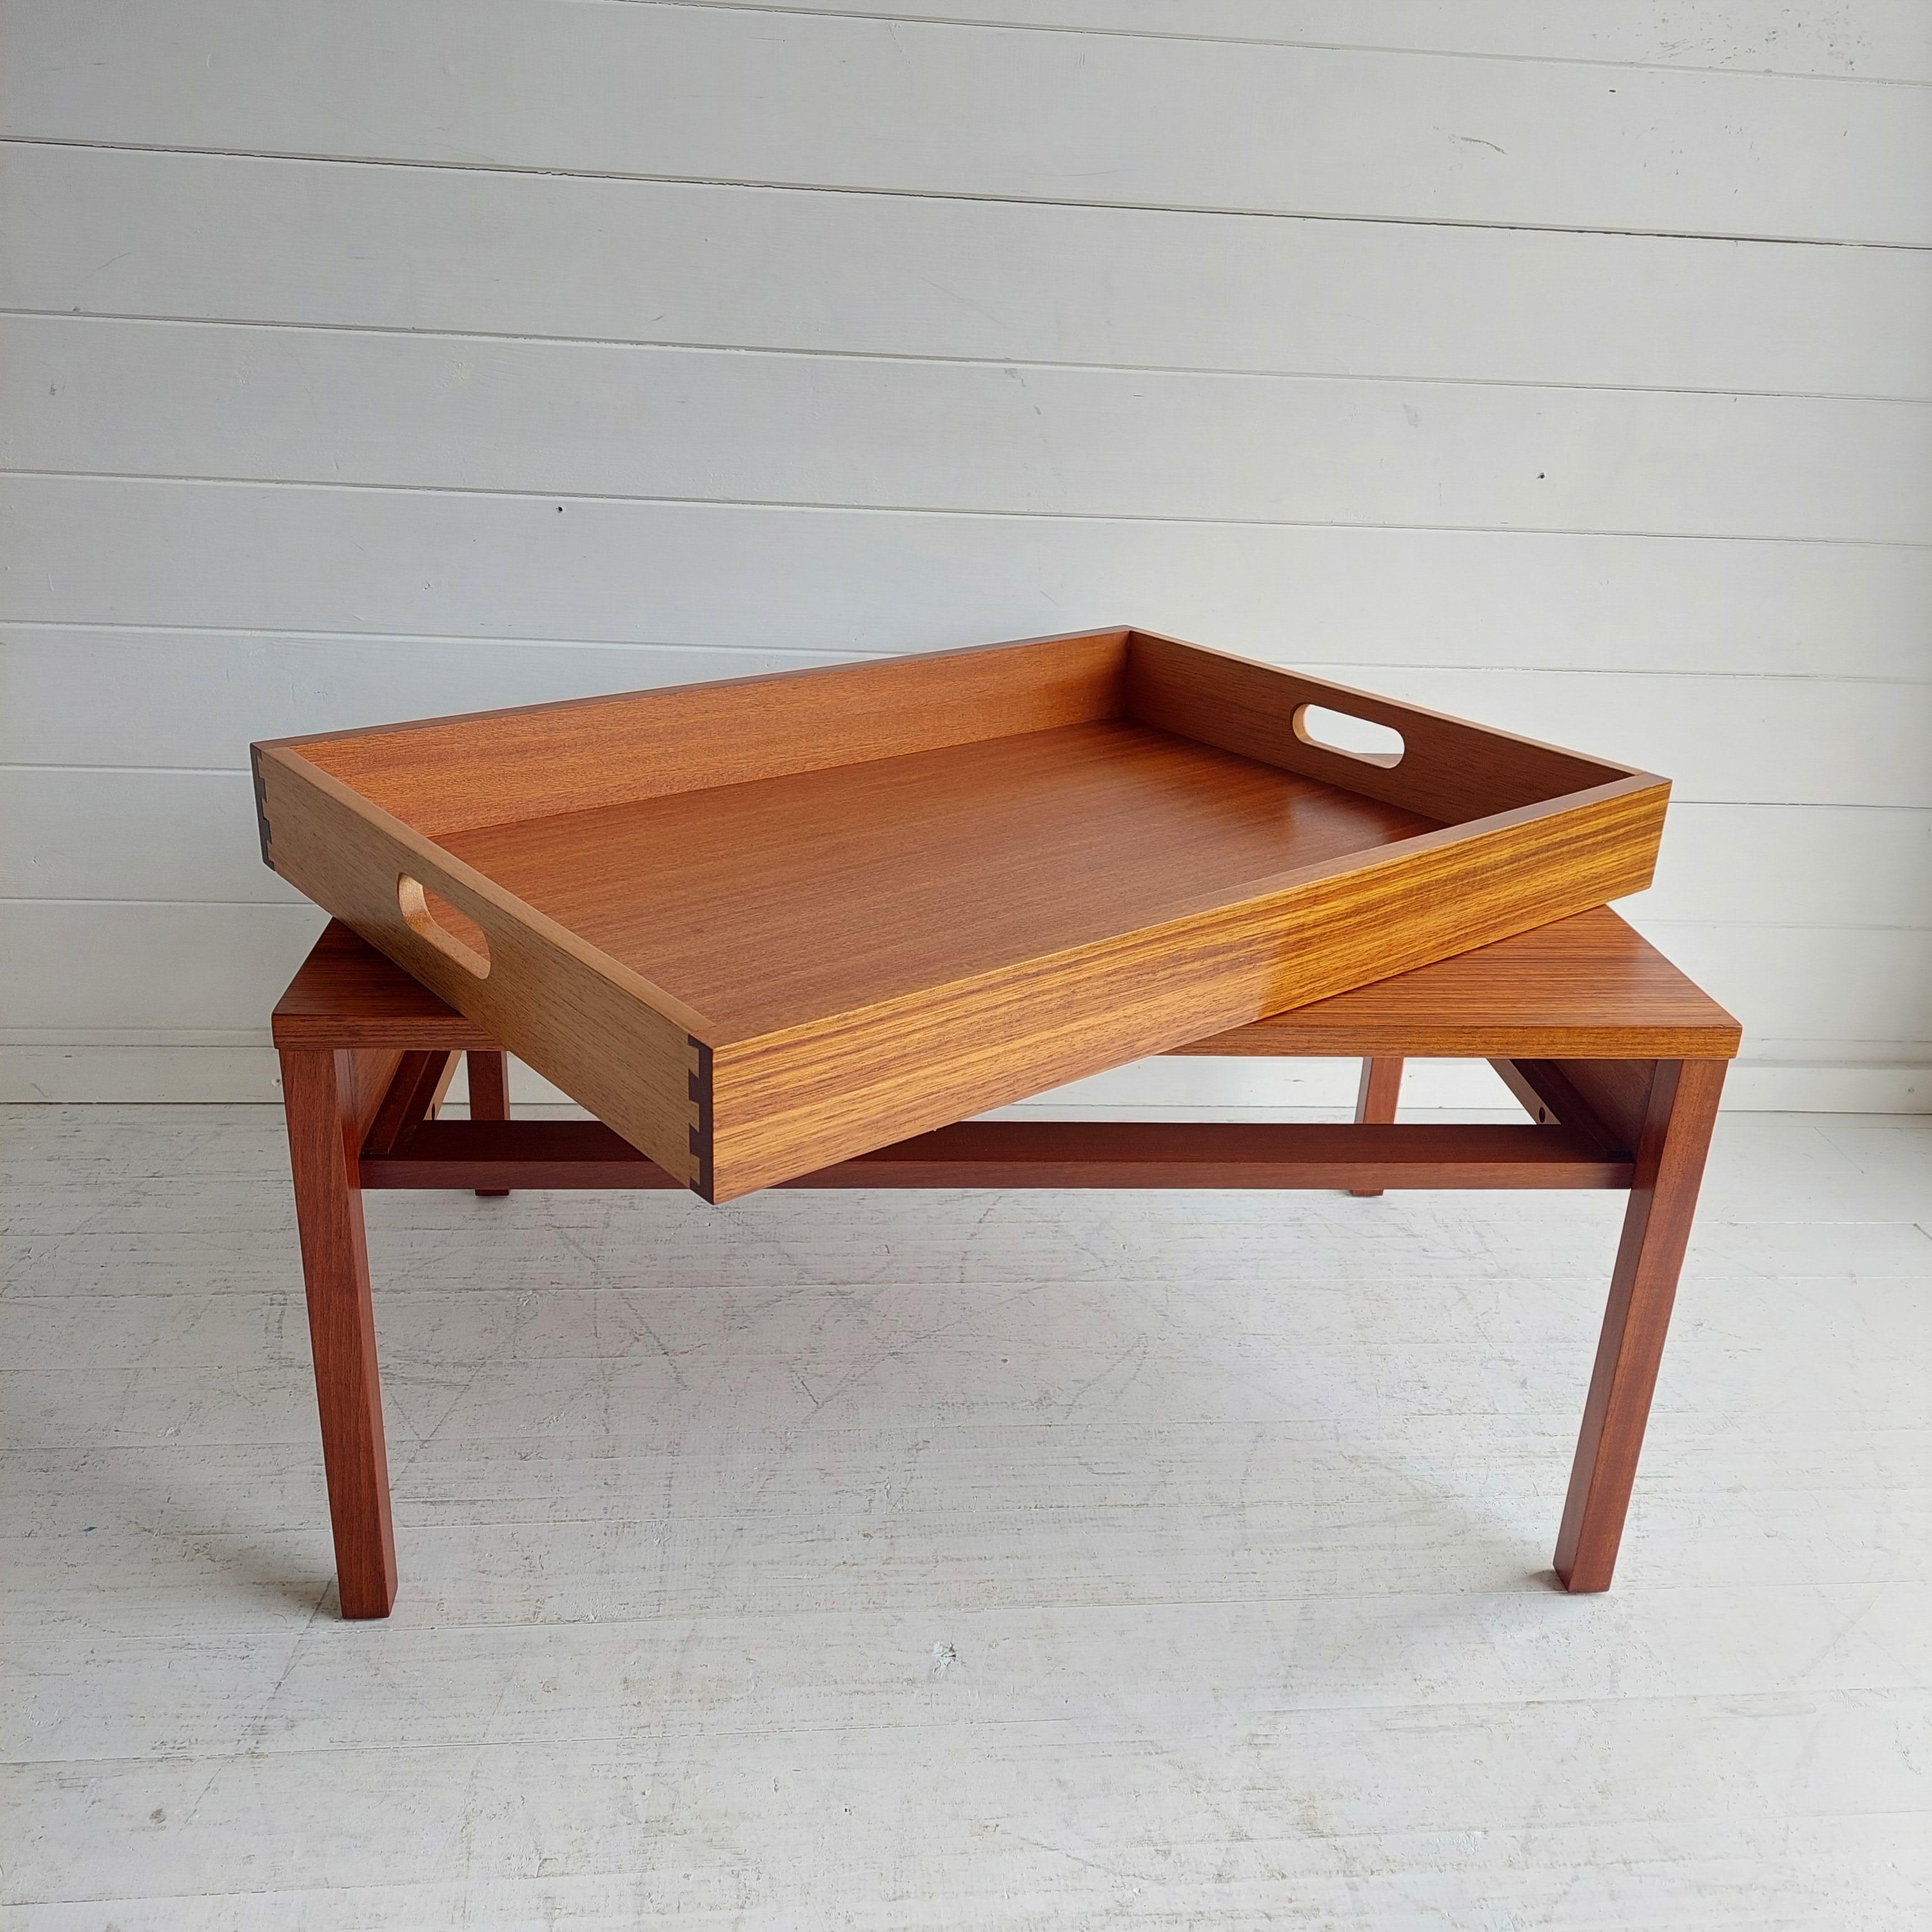 British Midcentury 1960s Meredew Teak Side Coffee Table with Drawer/Serving Tray